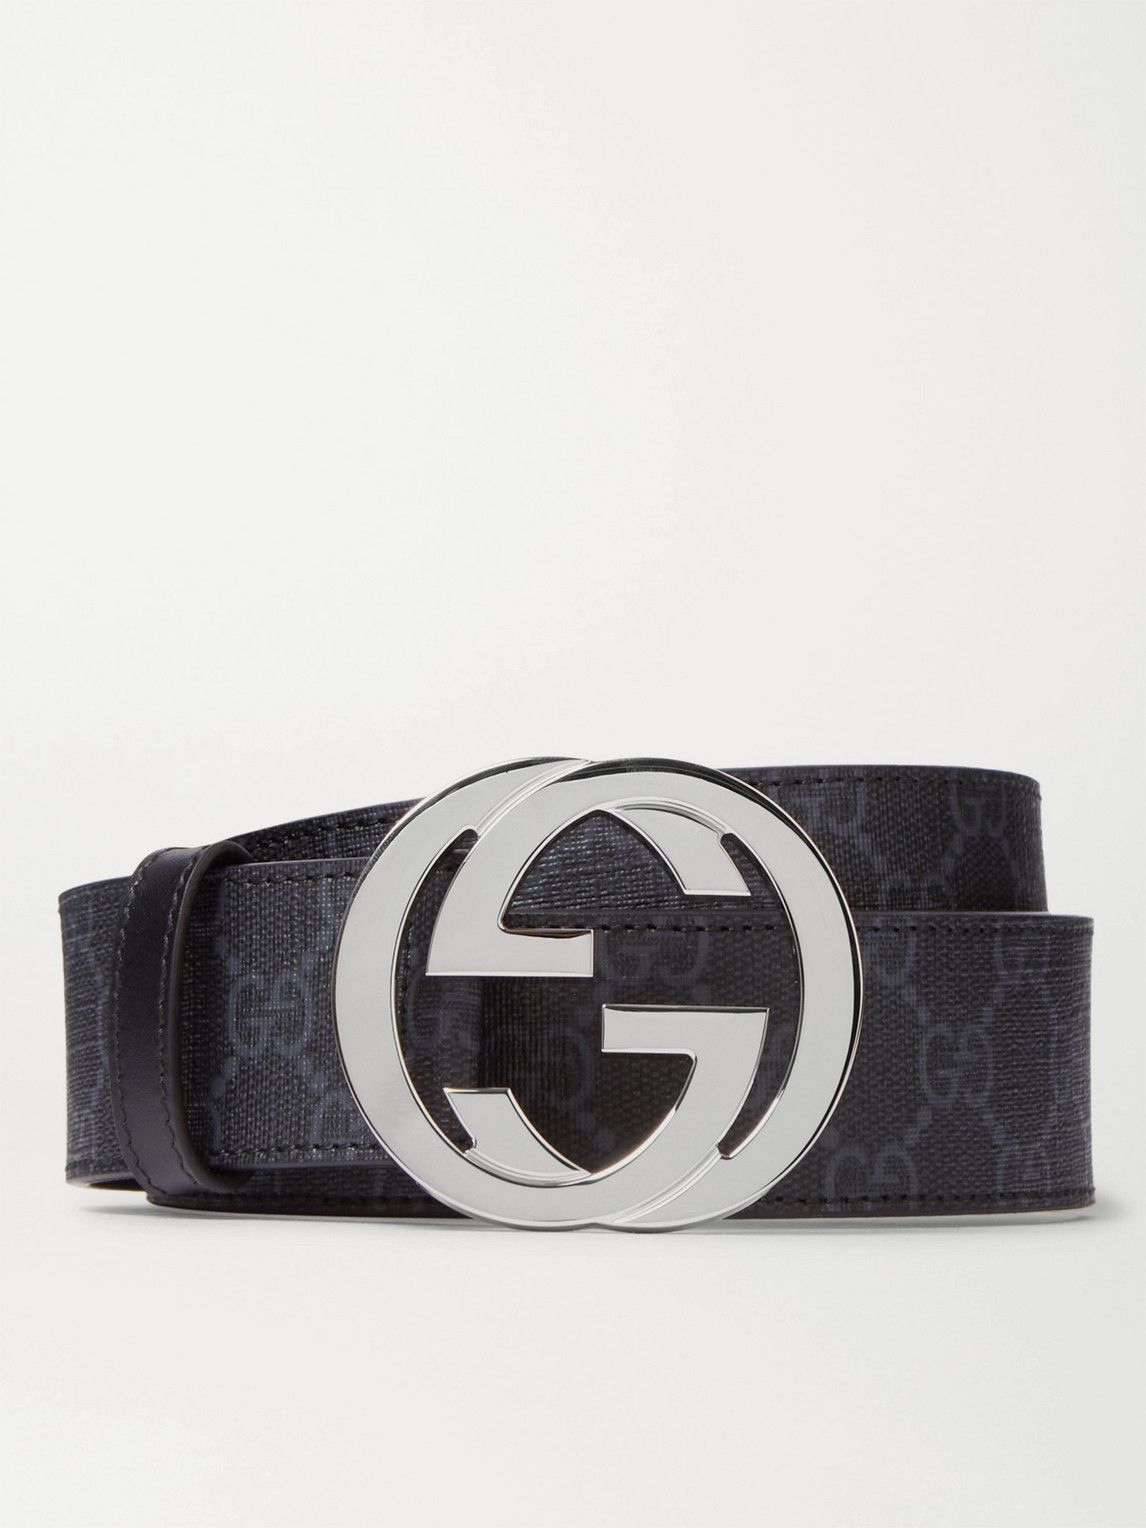 Luxury Defined: Gucci Belts for Iconic Style